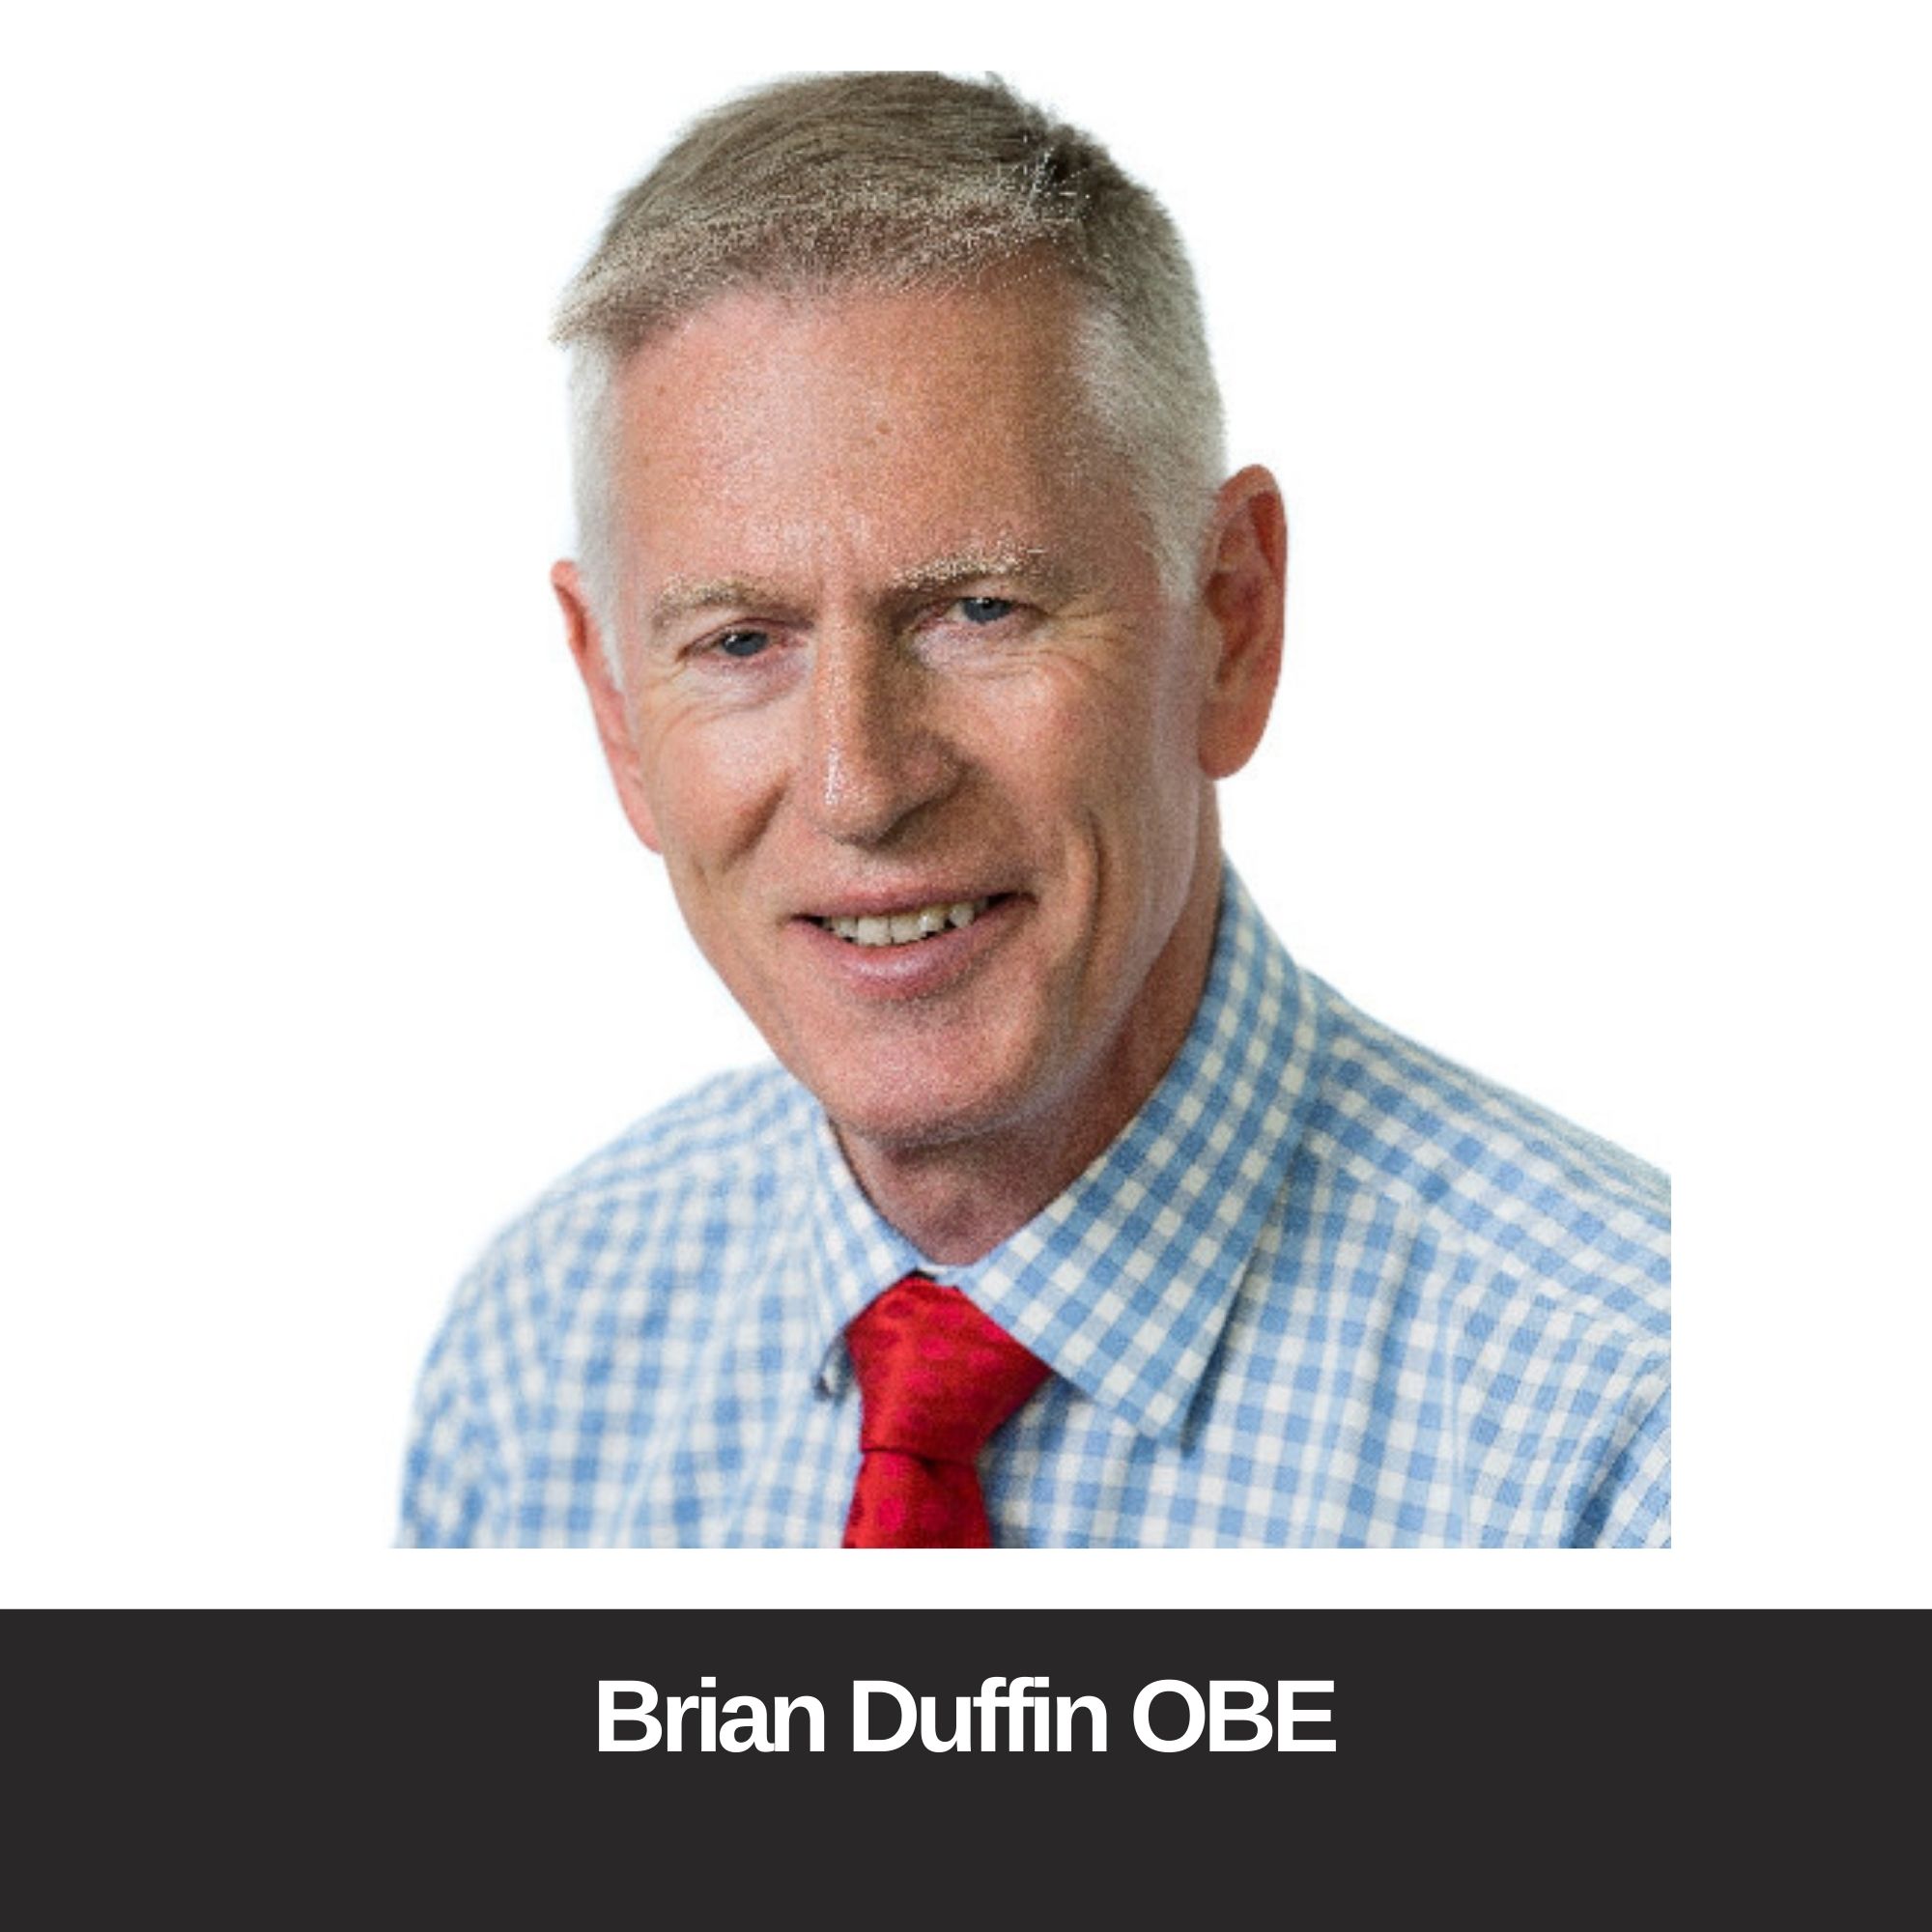 From Chief Executive to NED Portfolio - With Brian Duffin OBE